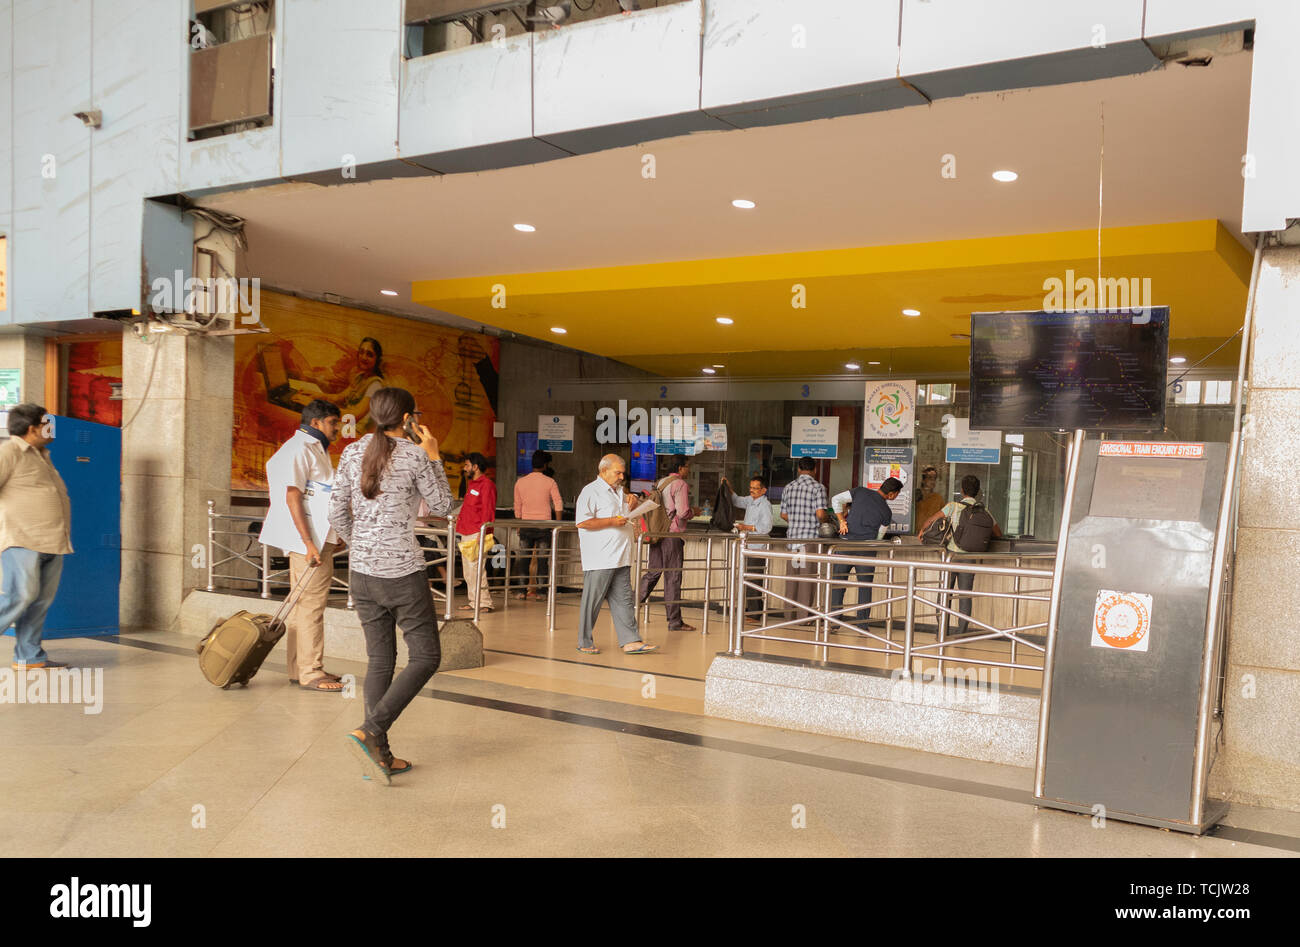 Bangalore India - June 3, 2019: Unidentified people at ticket counter to buy tickets at Bangalore railway station Stock Photo